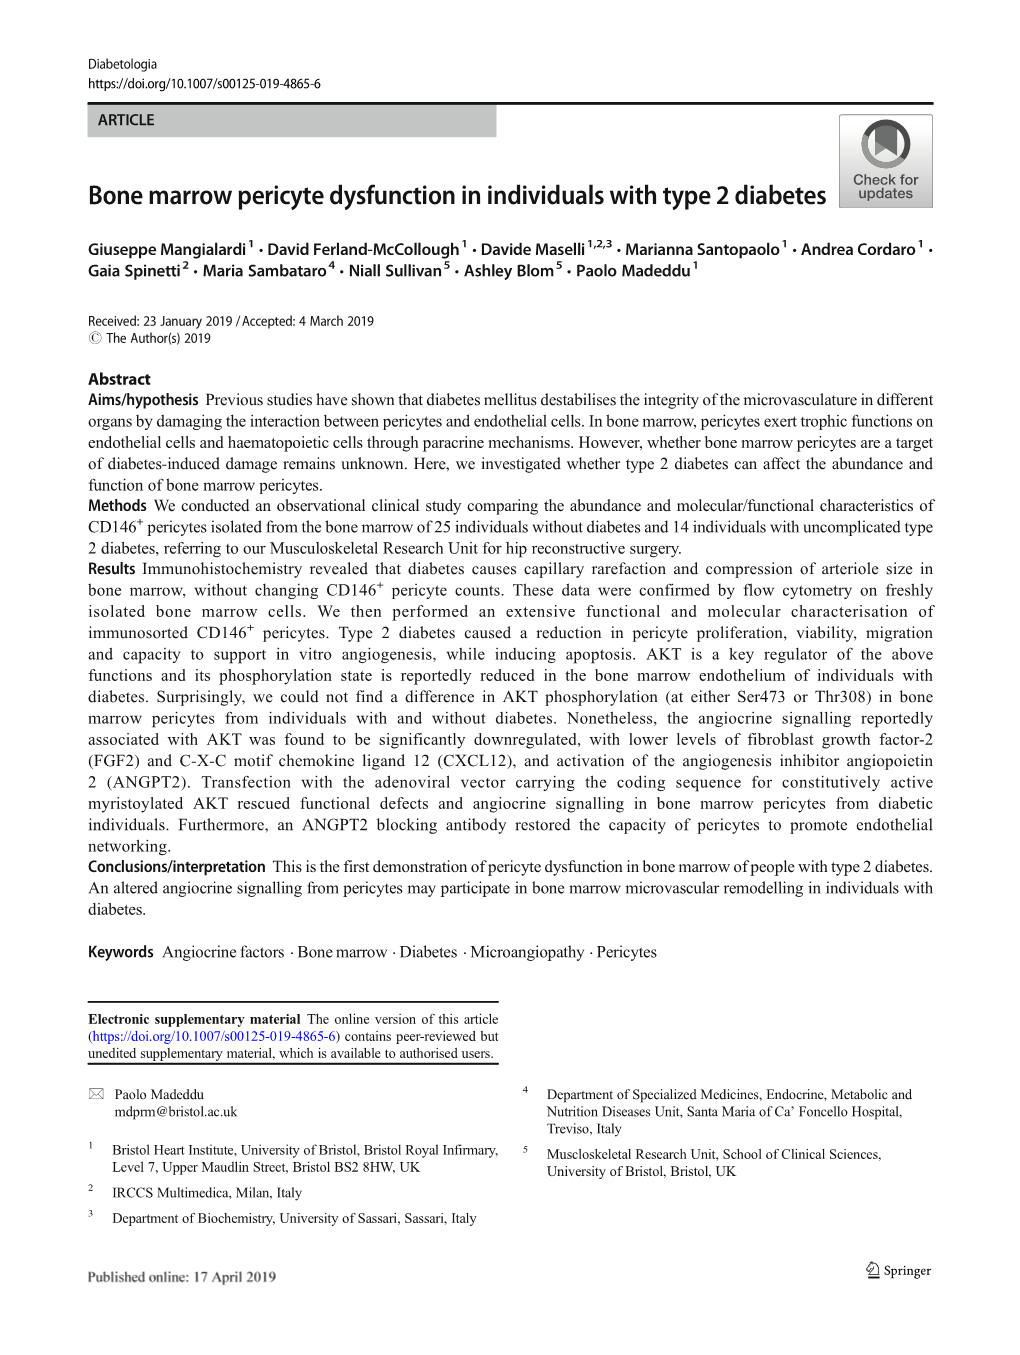 Bone Marrow Pericyte Dysfunction in Individuals with Type 2 Diabetes